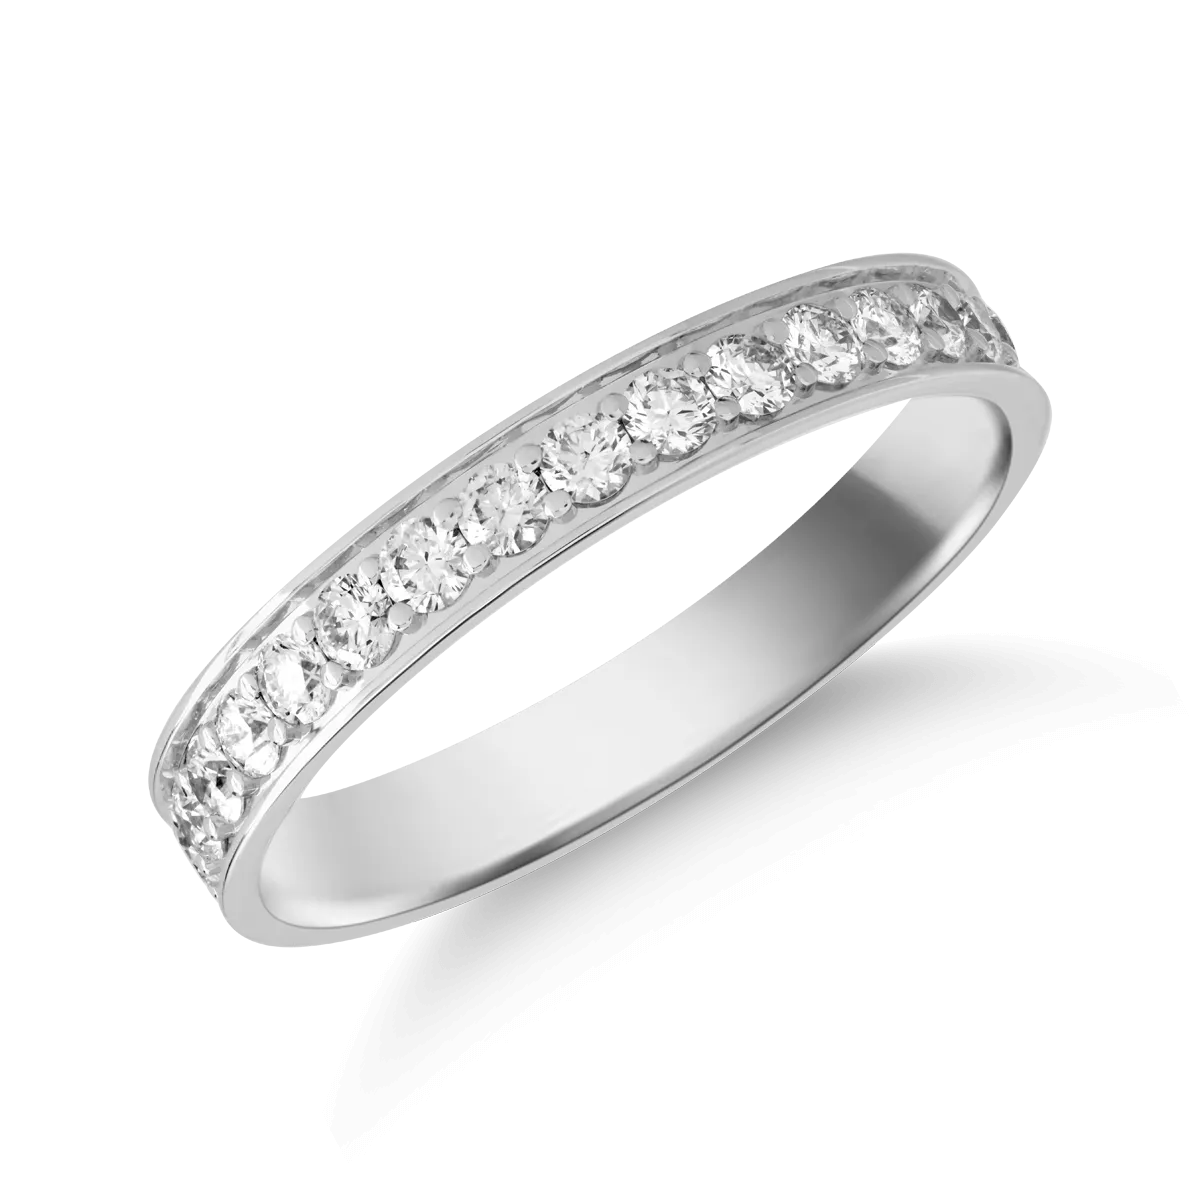 18K white gold infinity ring with 1.01ct diamonds